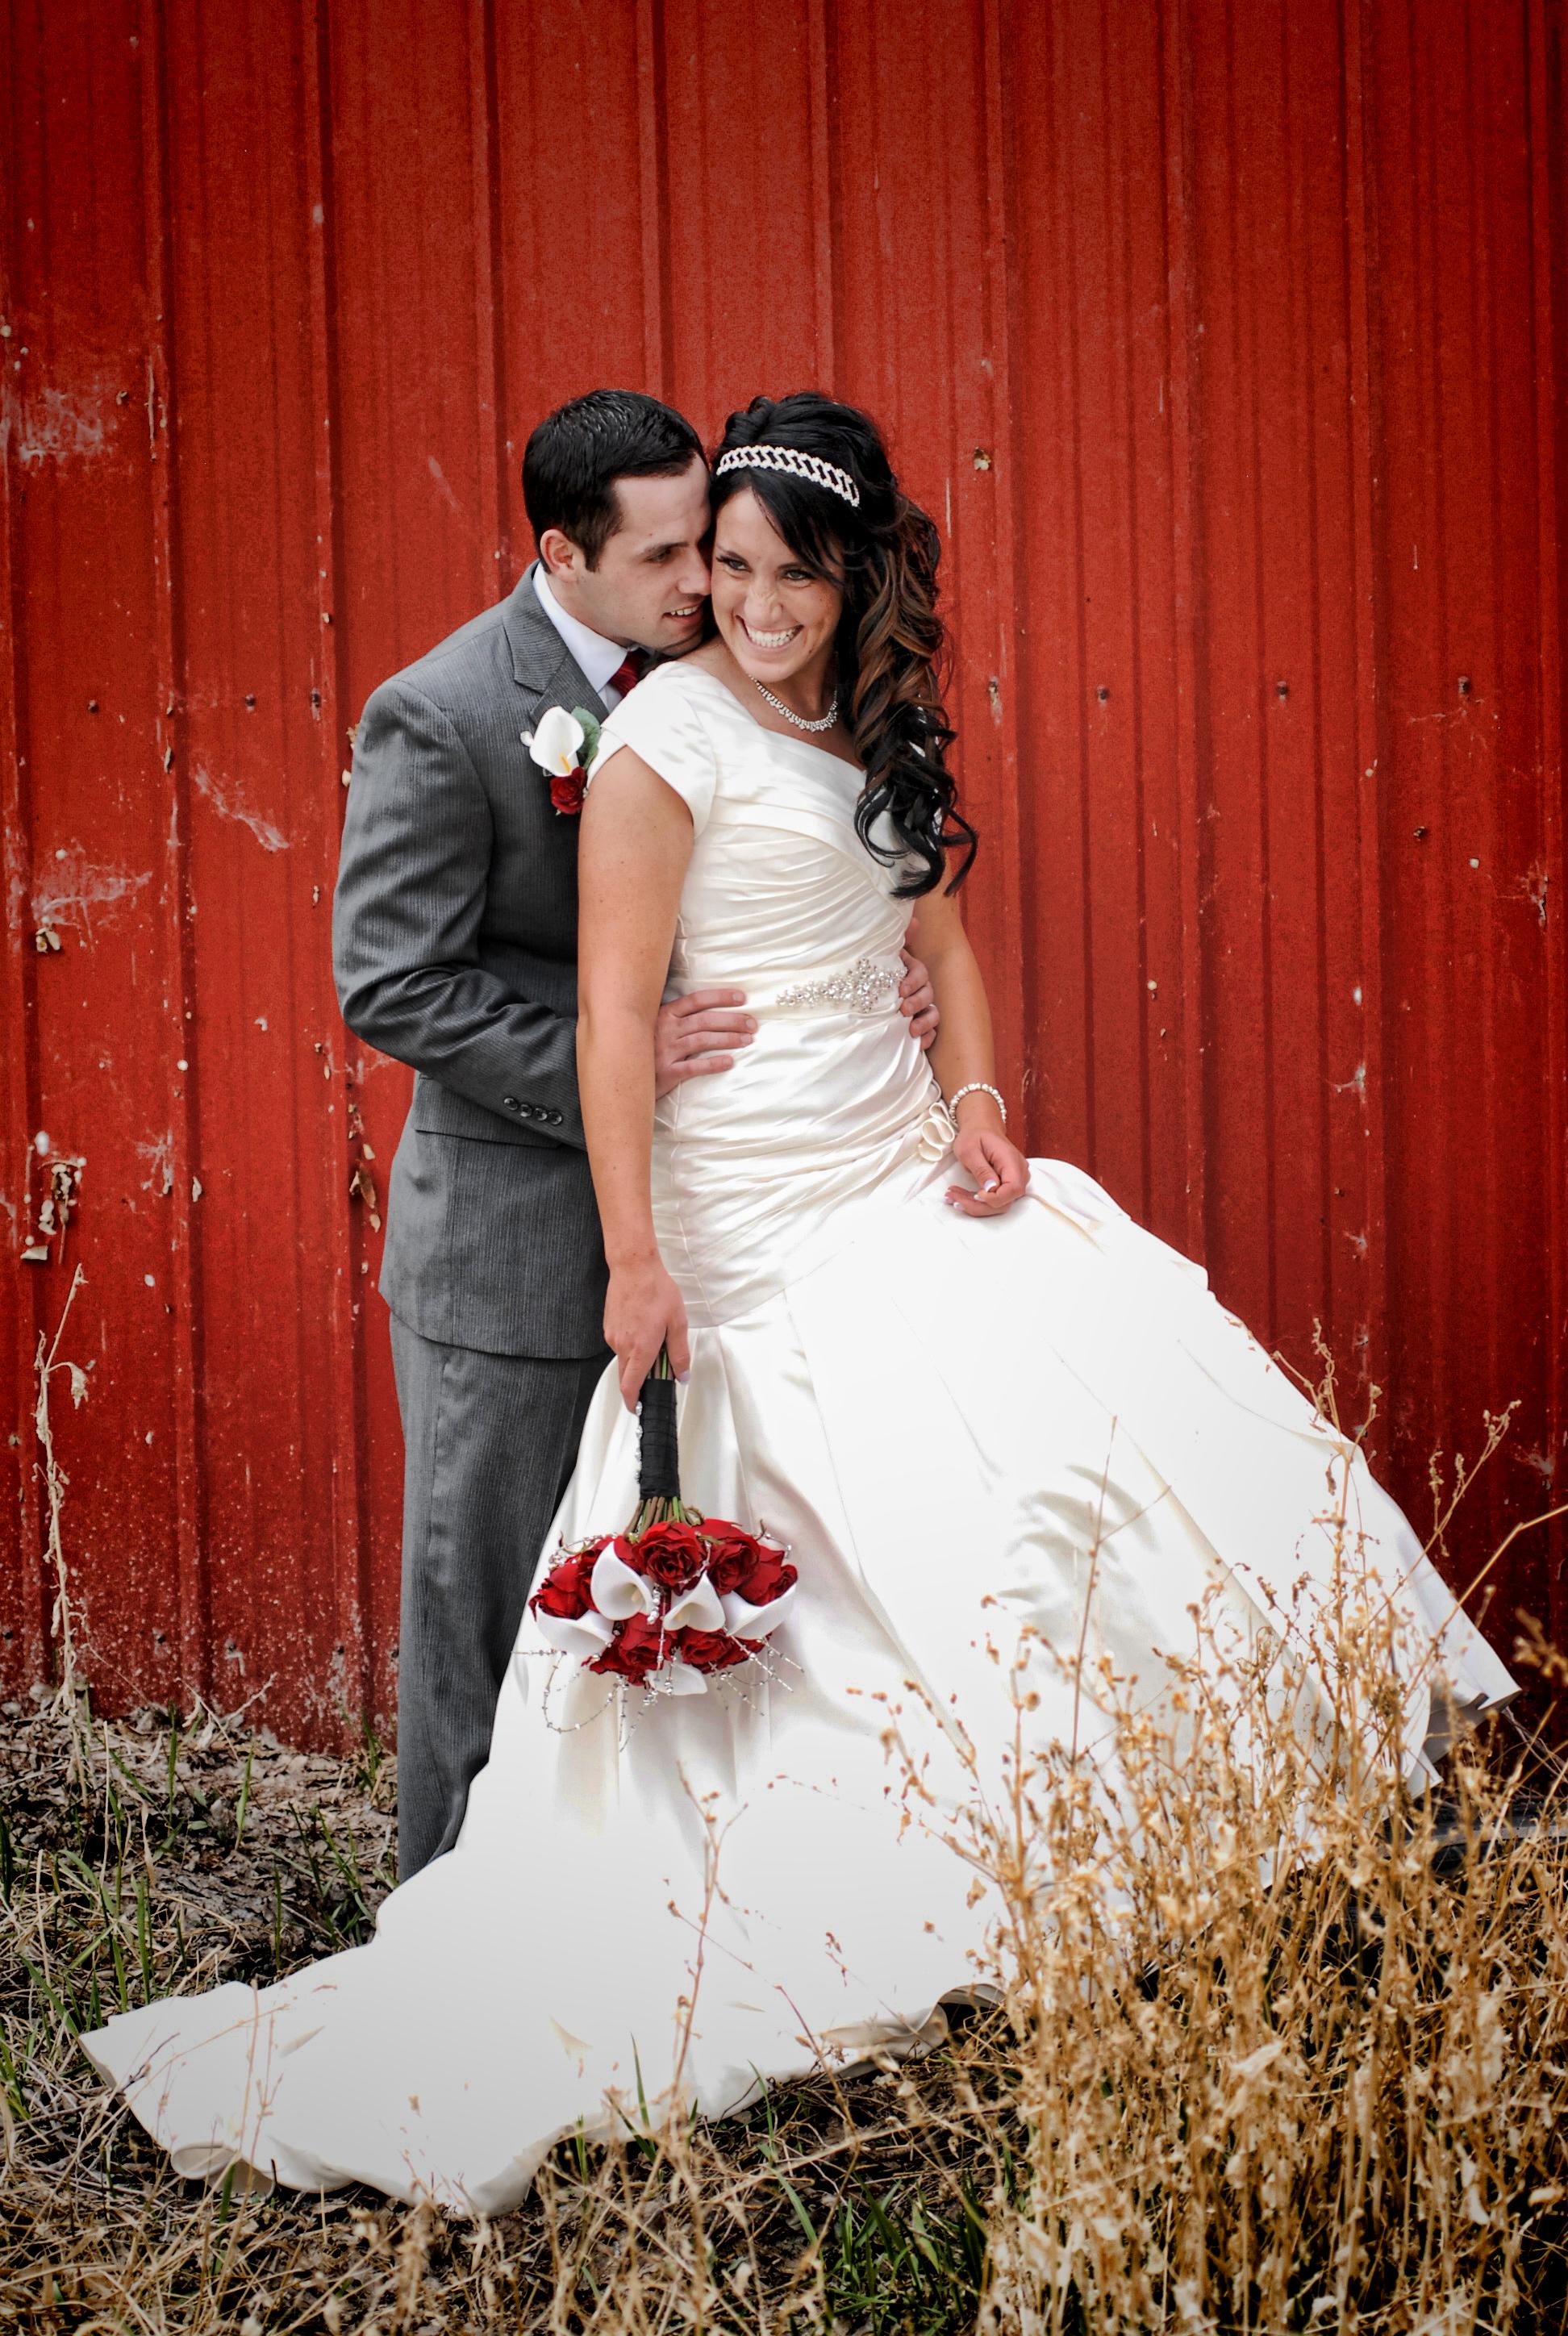 These bride and groom pictures were taken at an old shed near Payson, Utah.  We are so excited for the Payson LDS Temple to come in, so we can provide Payson Utah Wedding photography!!!!